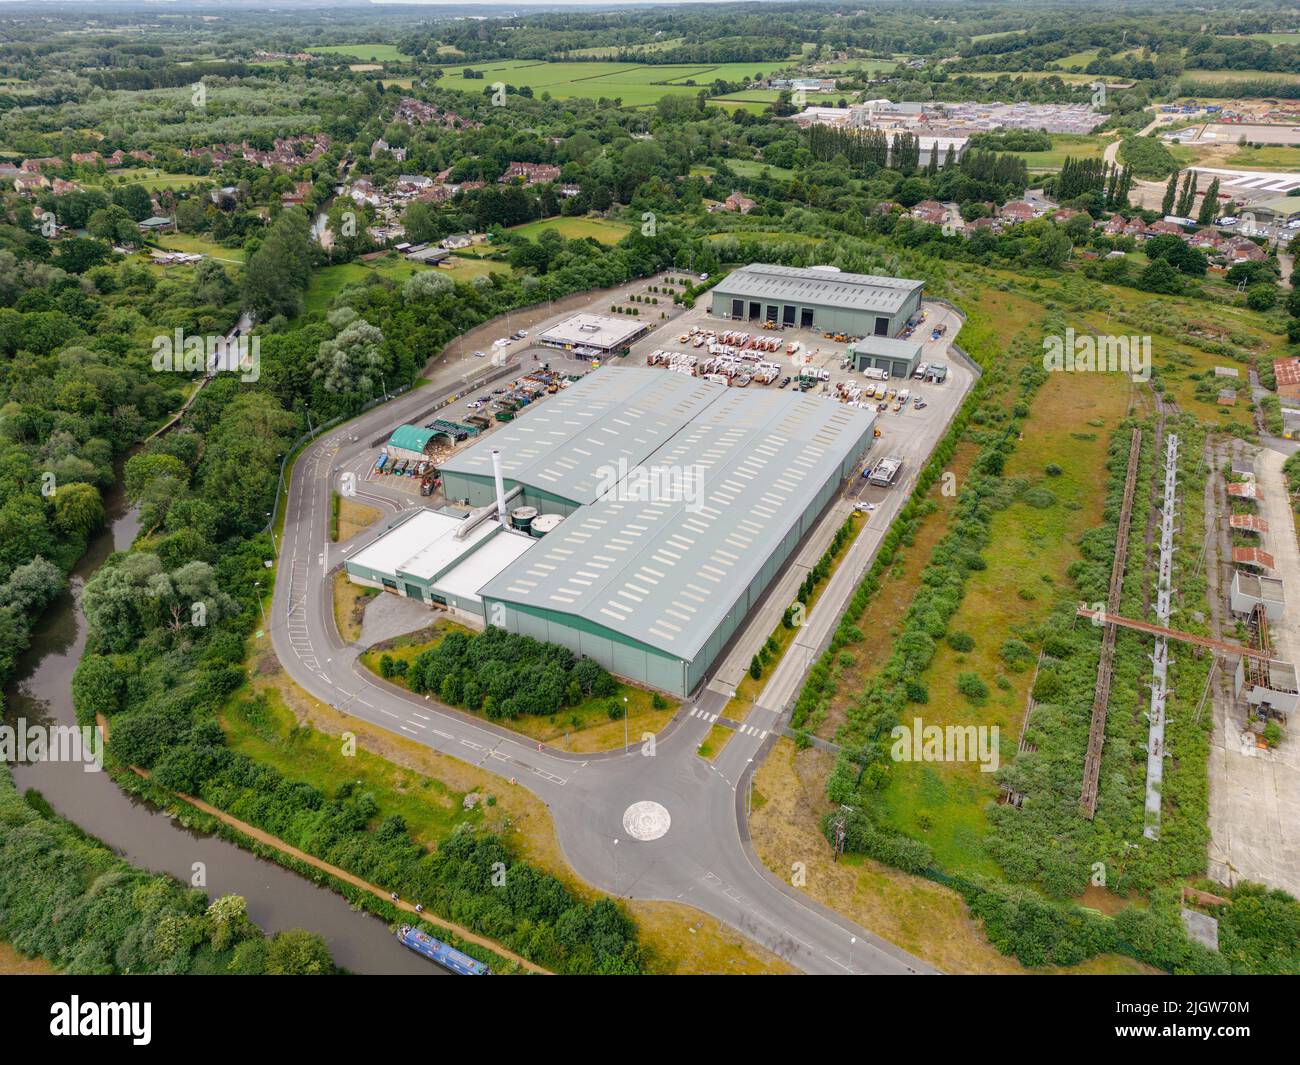 Padworth Recycling Centre Aerial View Stock Photo